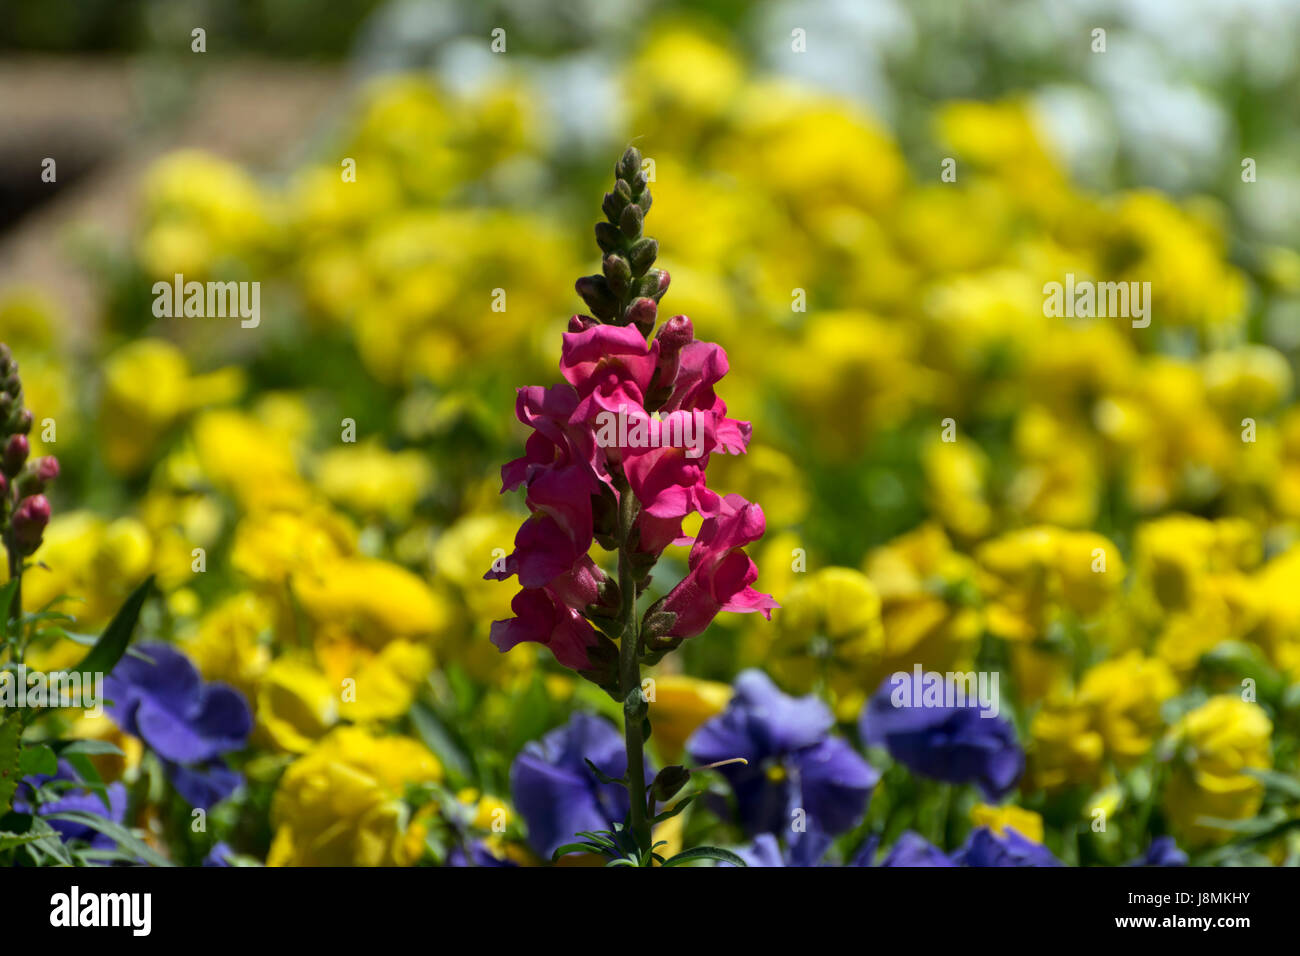 Cluster of pink flowers on a single stalk, standing out in contrast to the sea of yellow flowers in the garden background. Stock Photo